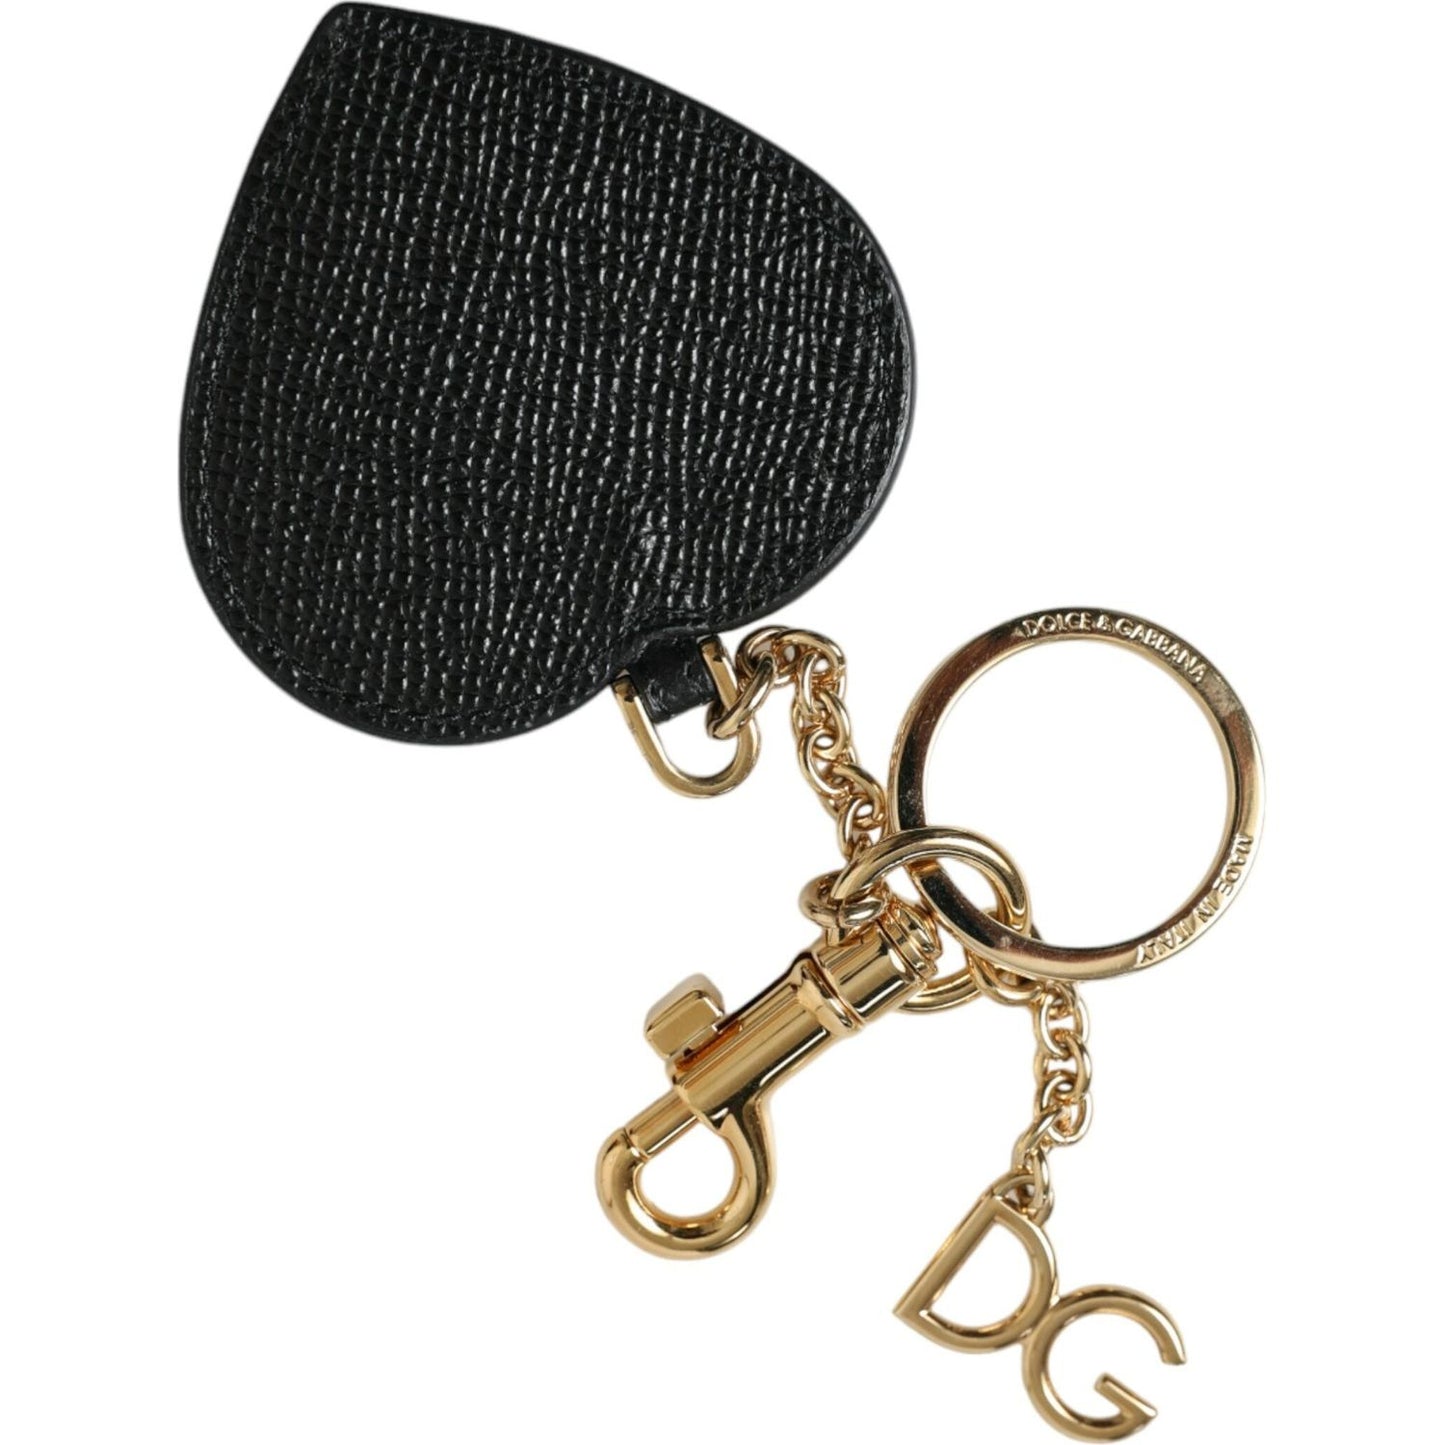 Dolce & Gabbana Stunning Gold and Pink Leather Keychain stunning-gold-and-pink-leather-keychain